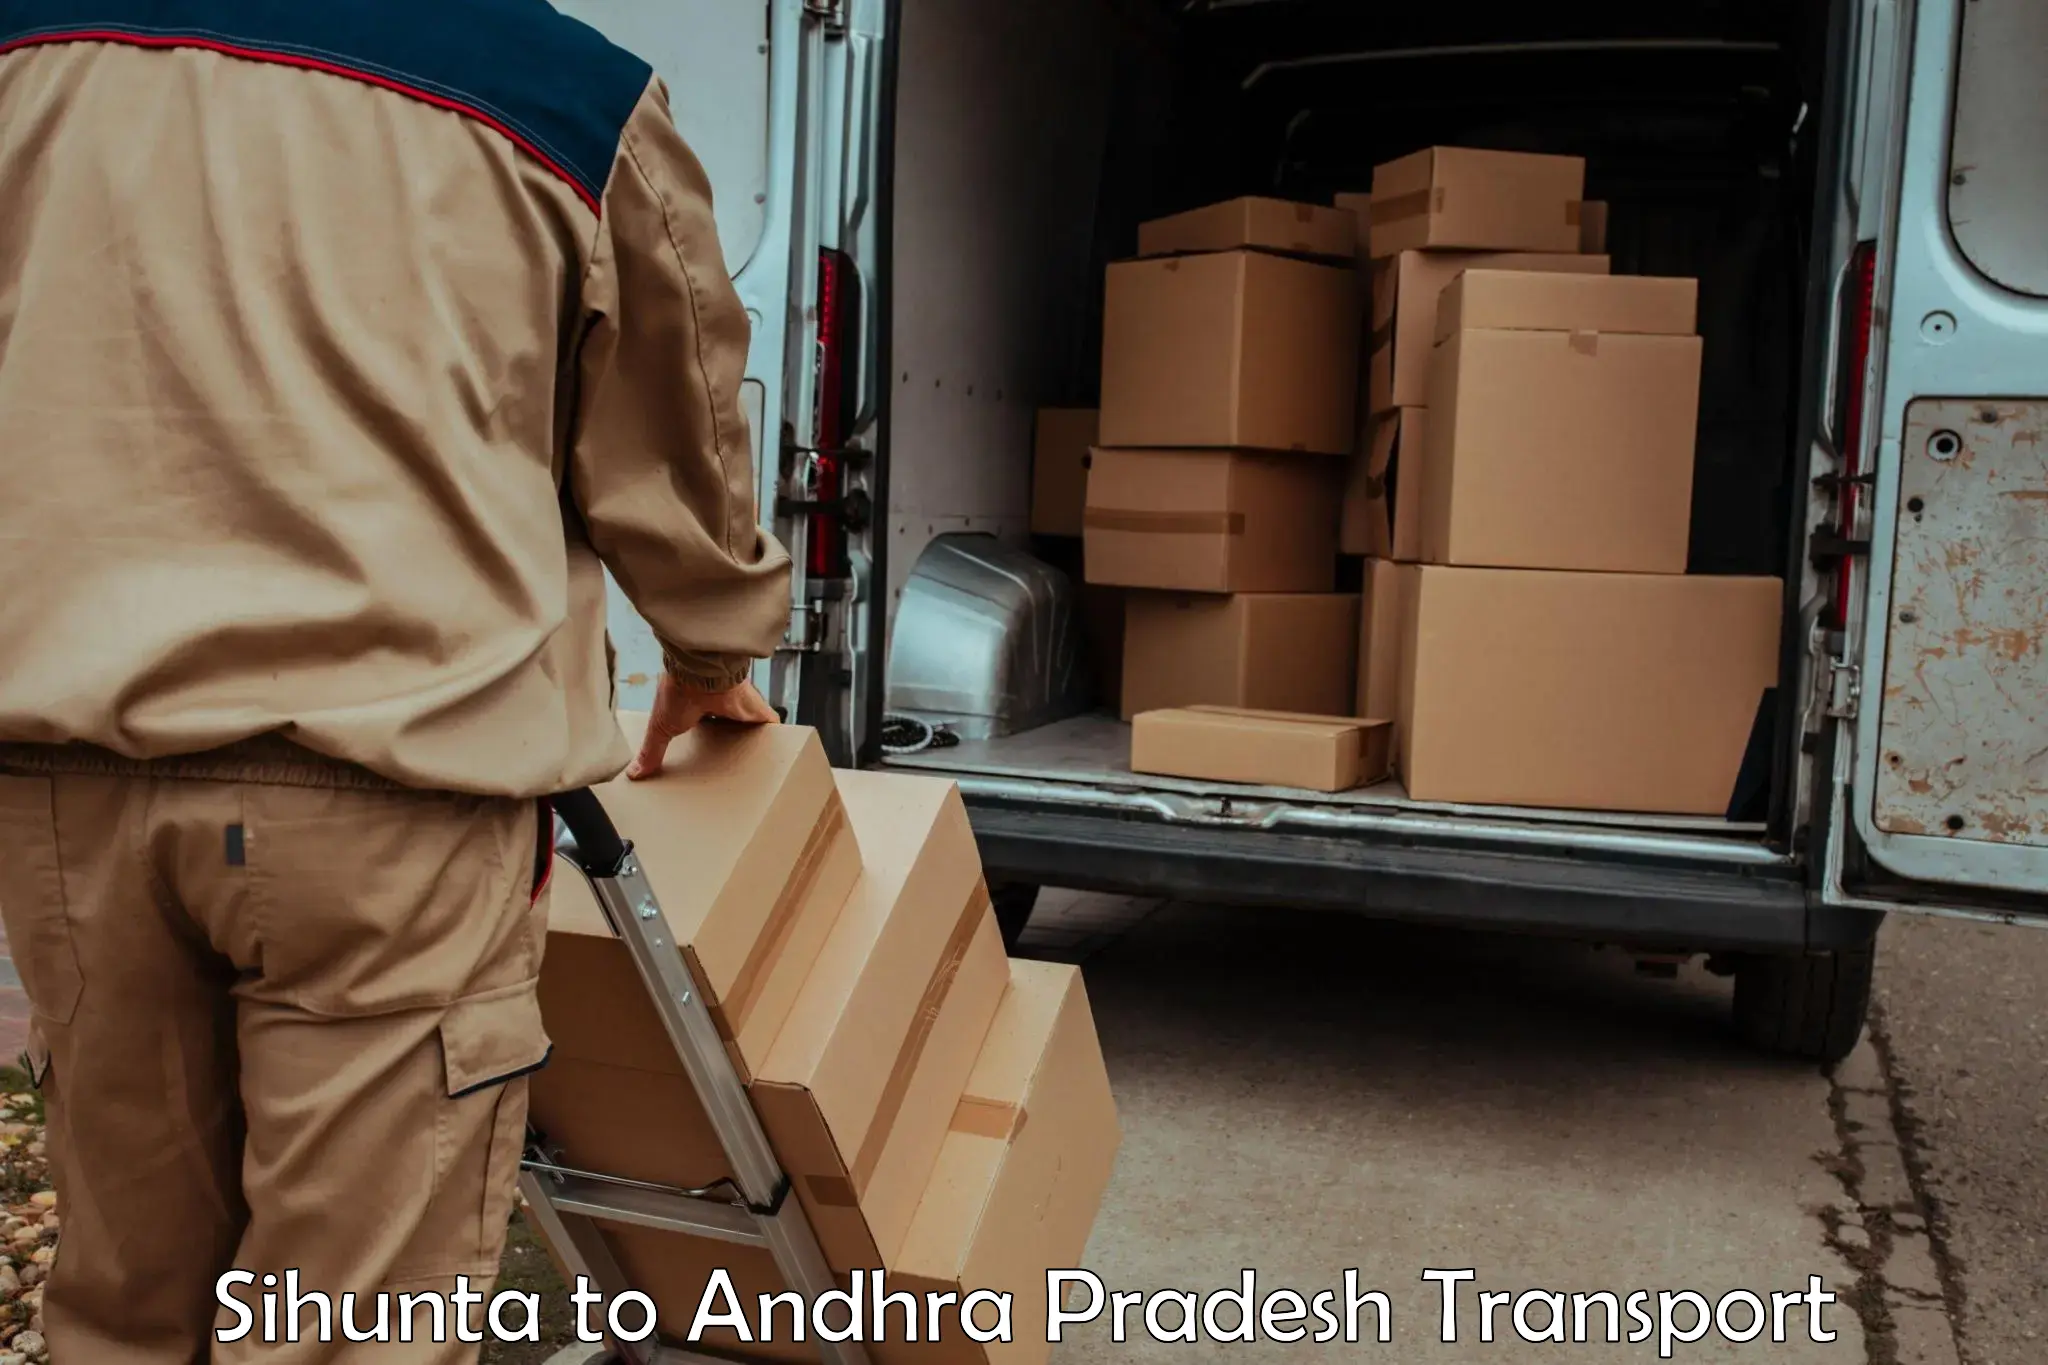 Nationwide transport services Sihunta to Kothapalli